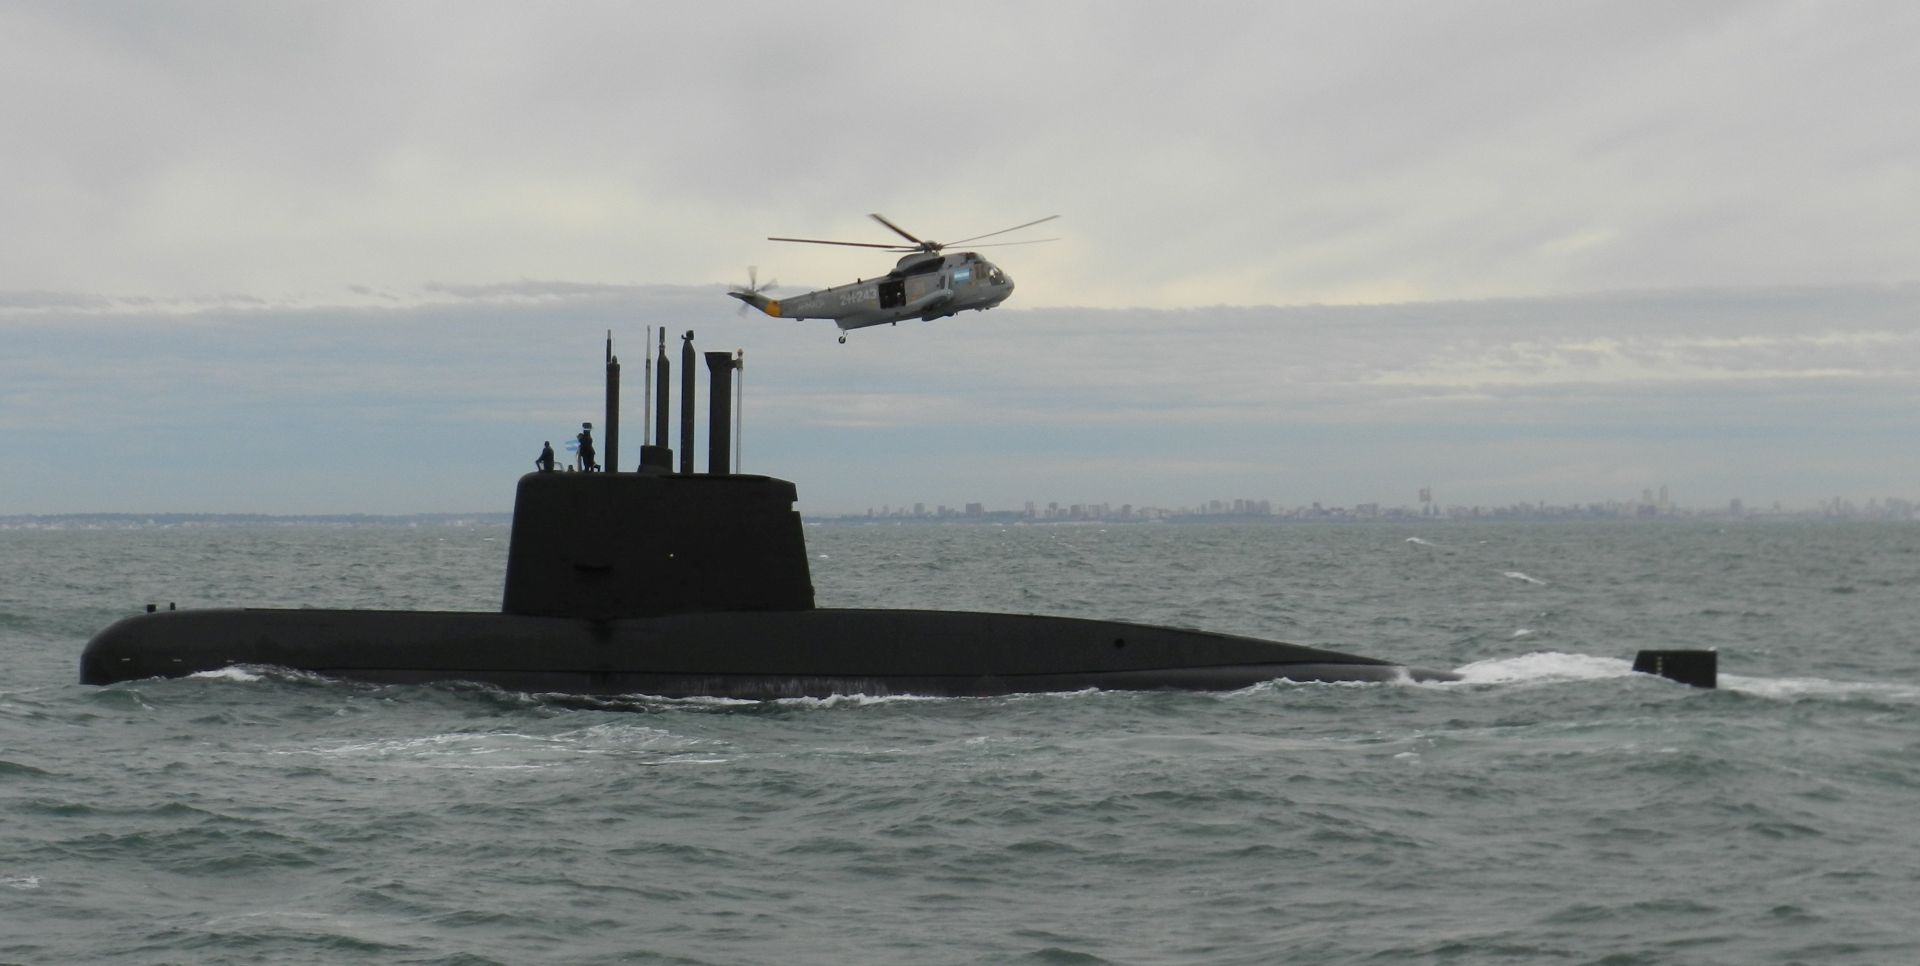 epa06336024 An undated handout photo made available by the Argentine Navy on 17 November 2017 shows the ARA San Juan submarine. The Argentine Navy said it has lost contact with the the submarine off the countrys southern coast. The submarine with a crew of 44 has not made contact in 48 hours.  Navy ships and aircraft are searching the area of last known location.  EPA/ARGENTINA NAVY HANDOUT  HANDOUT EDITORIAL USE ONLY/NO SALES